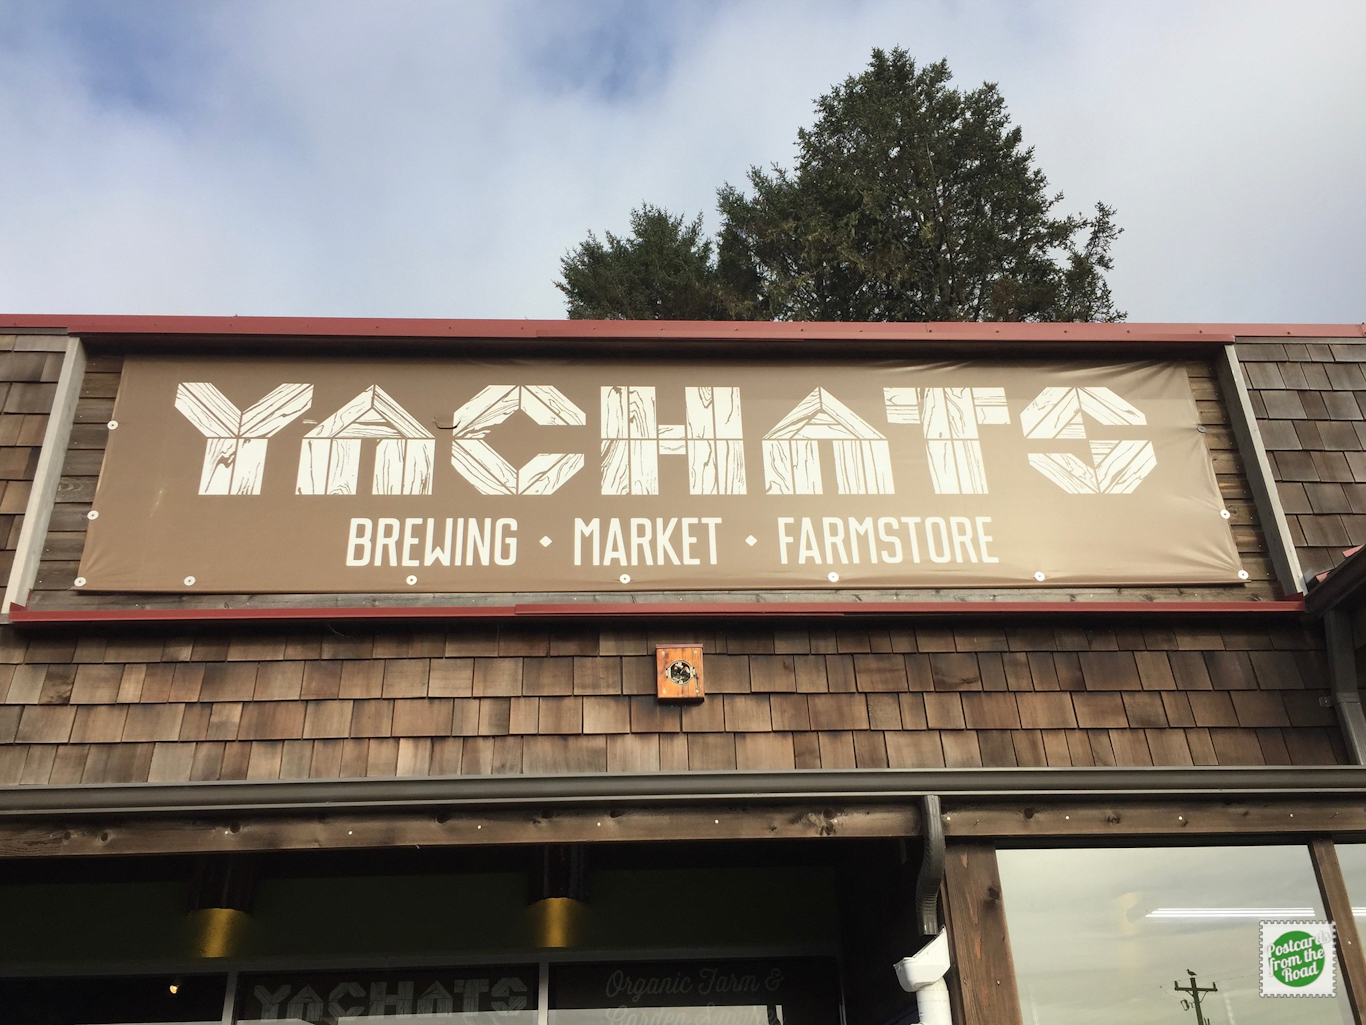 Yachats Brewing – Well worth the visit.